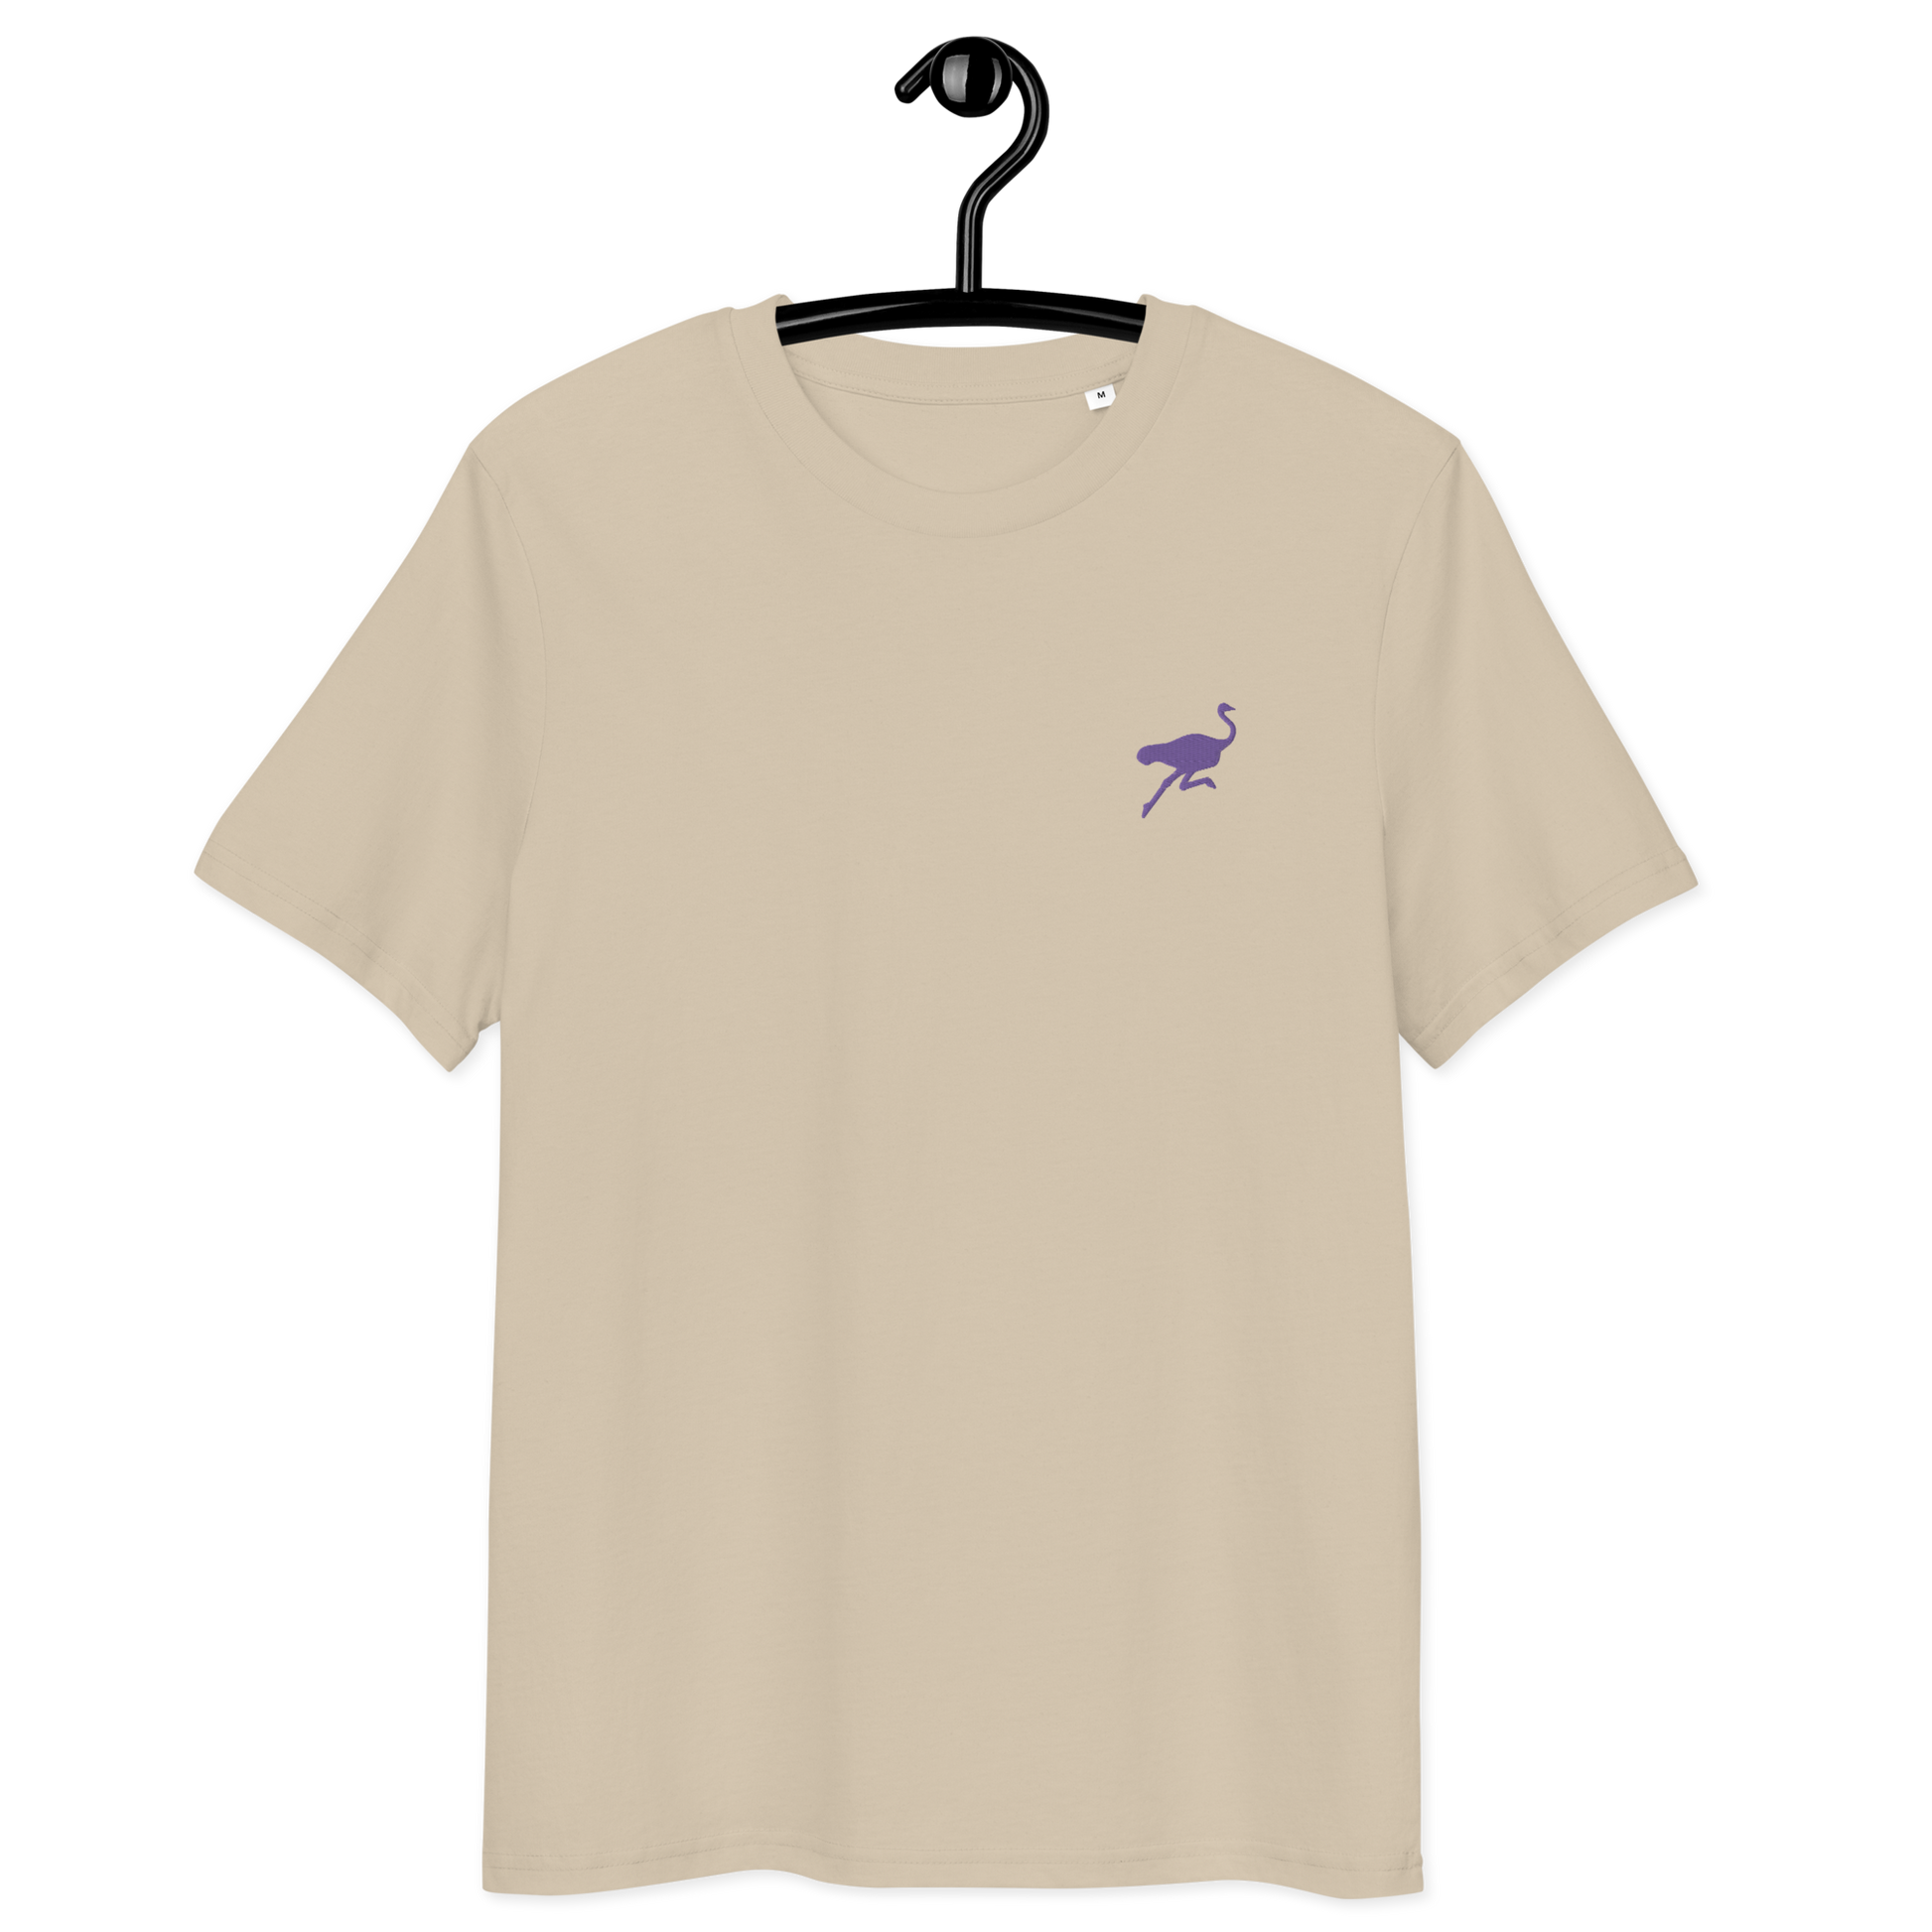 Front view of a desert dust colored embroidered nostr t-shirt.